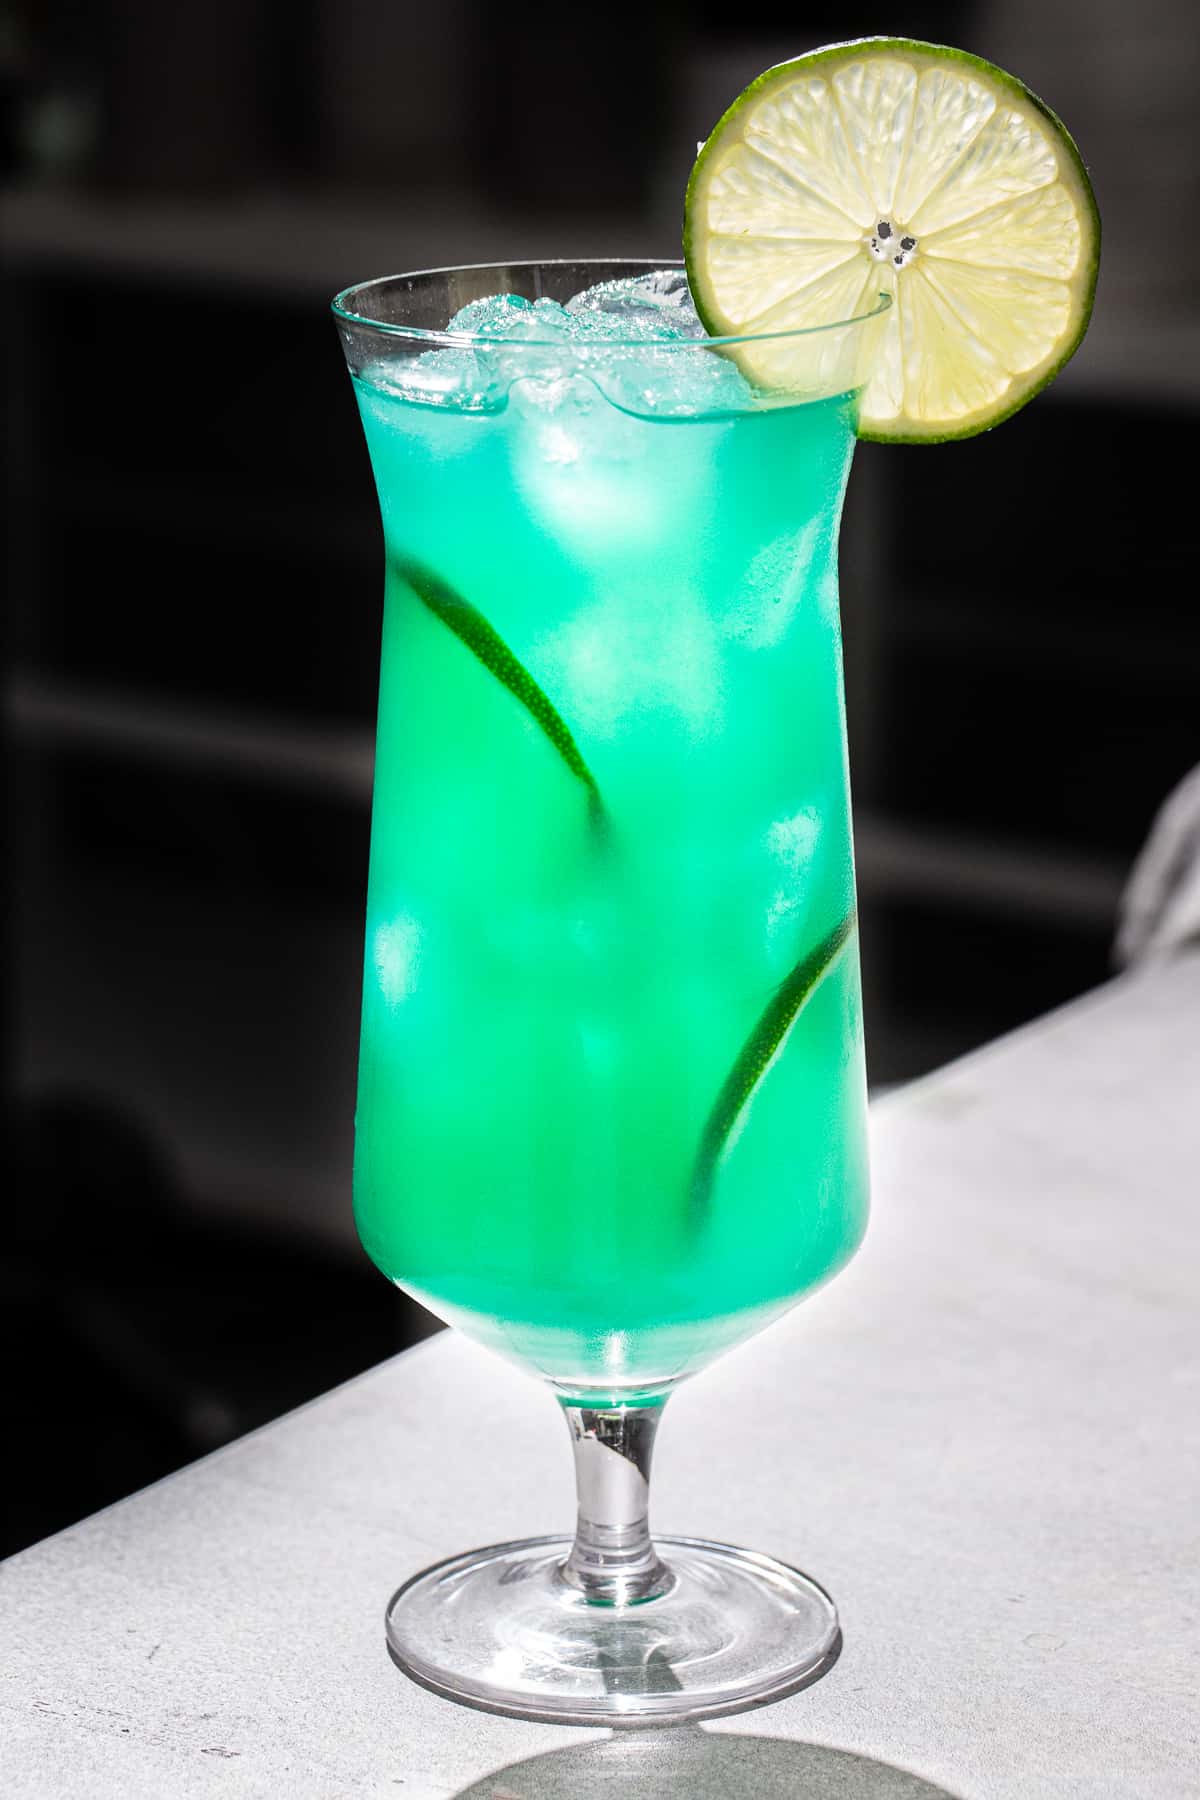 Side view of a Mermaid water cocktail with three cut lime slices as garnish. The drink is vibrant aqua in color. It is backlit on a darkened background with light coming from behind to light up the glass. The drink sits on a grey countertop.